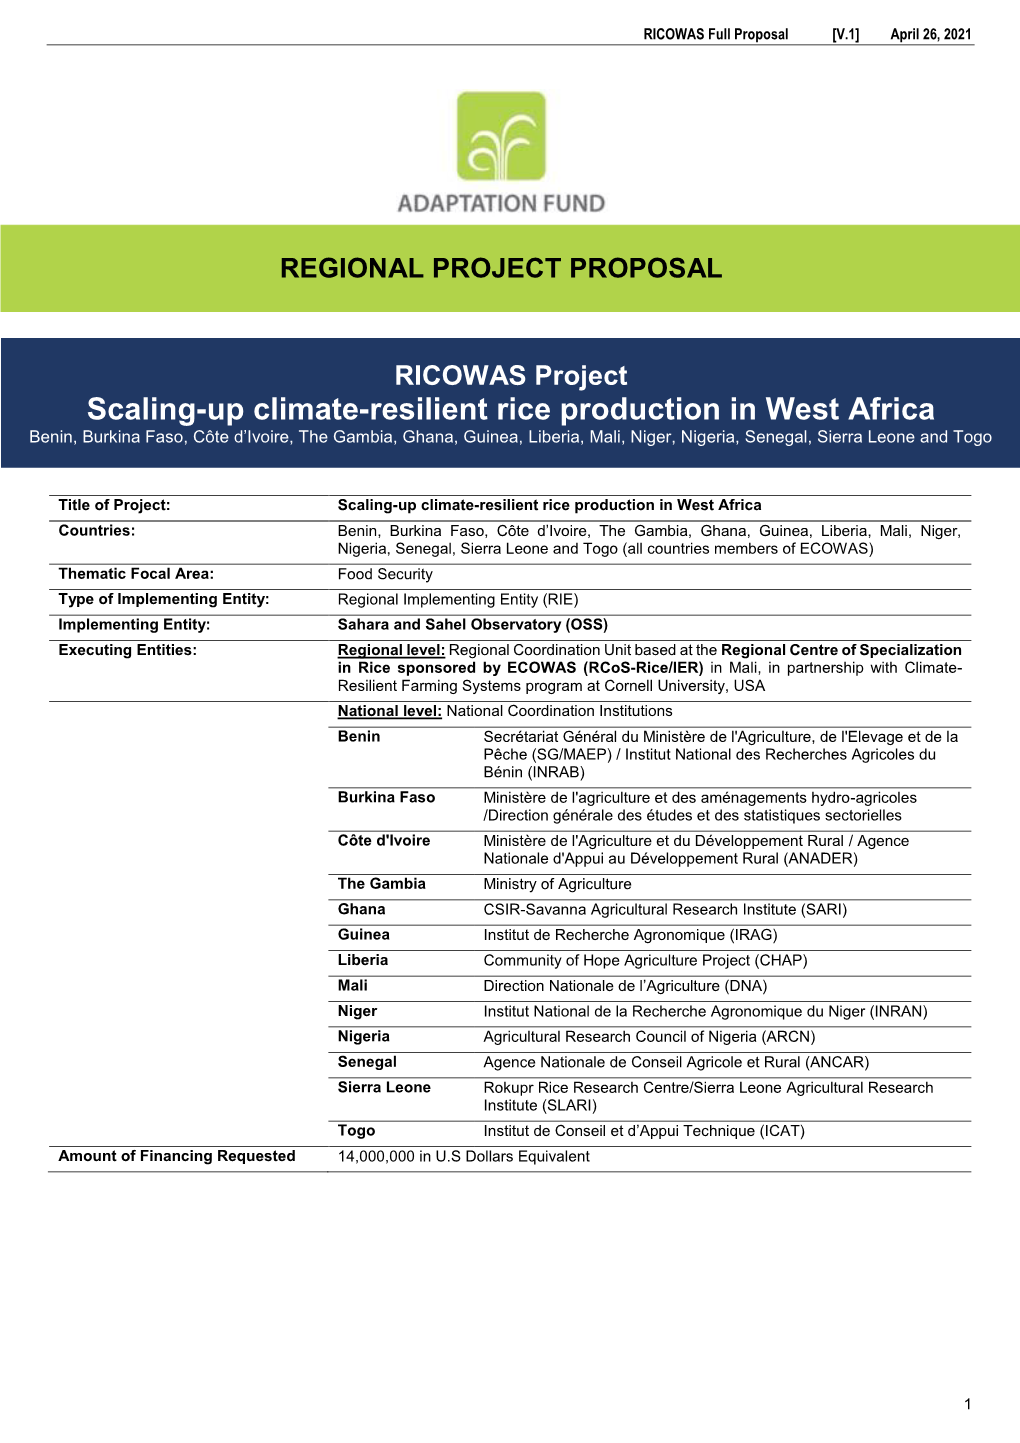 Scaling-Up Climate-Resilient Rice Production in West Africa